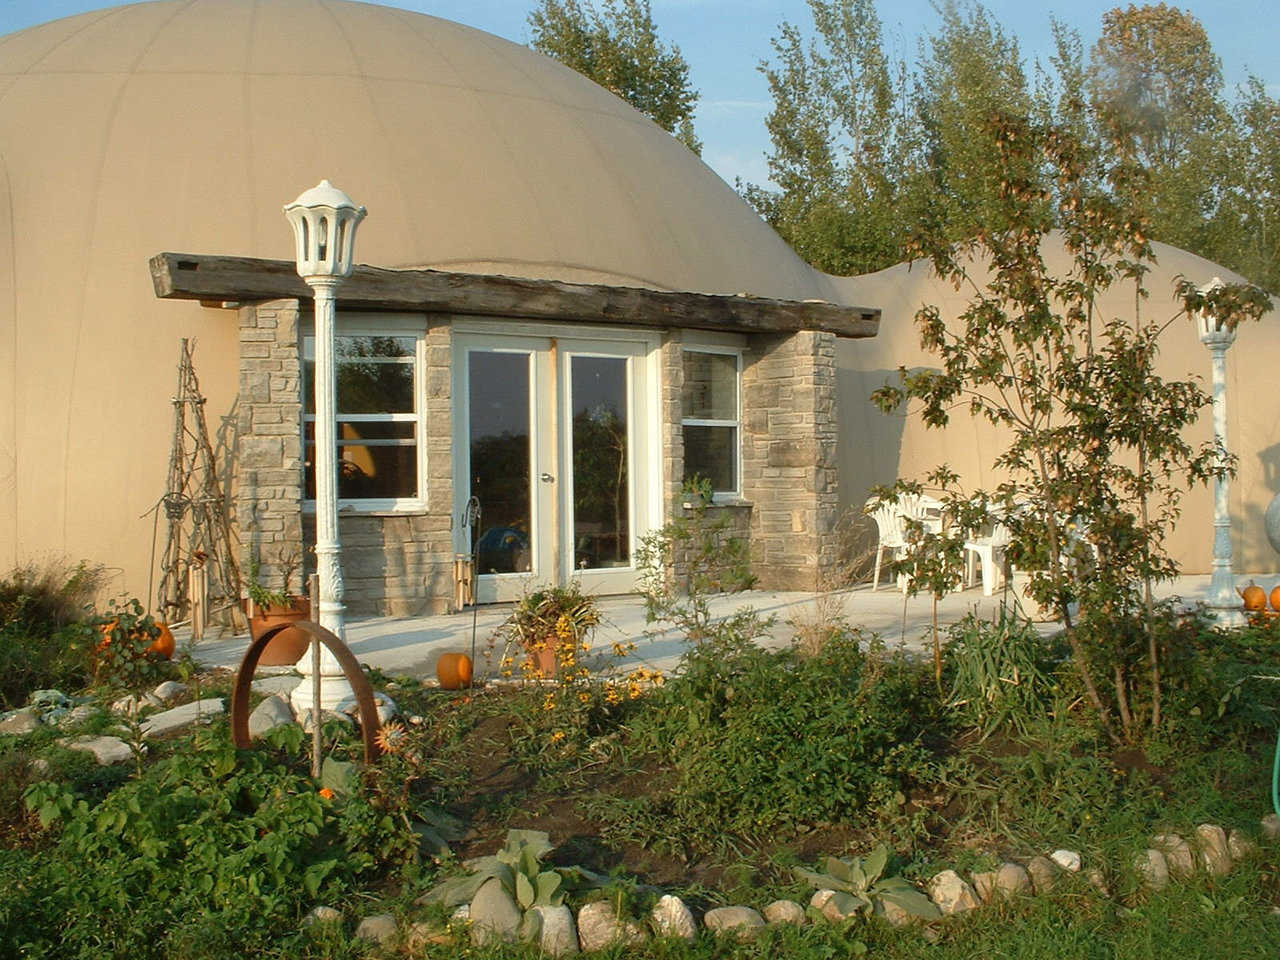 Monolithic Dome Dream Home — Rebecca and Sunny Cushnie of Southampton Ontario, Canada enjoy these two interconnected domes. The larger dome includes the main living/dining area, a kitchen, laundry room and two bedrooms. The smaller come encompasses the master suite.